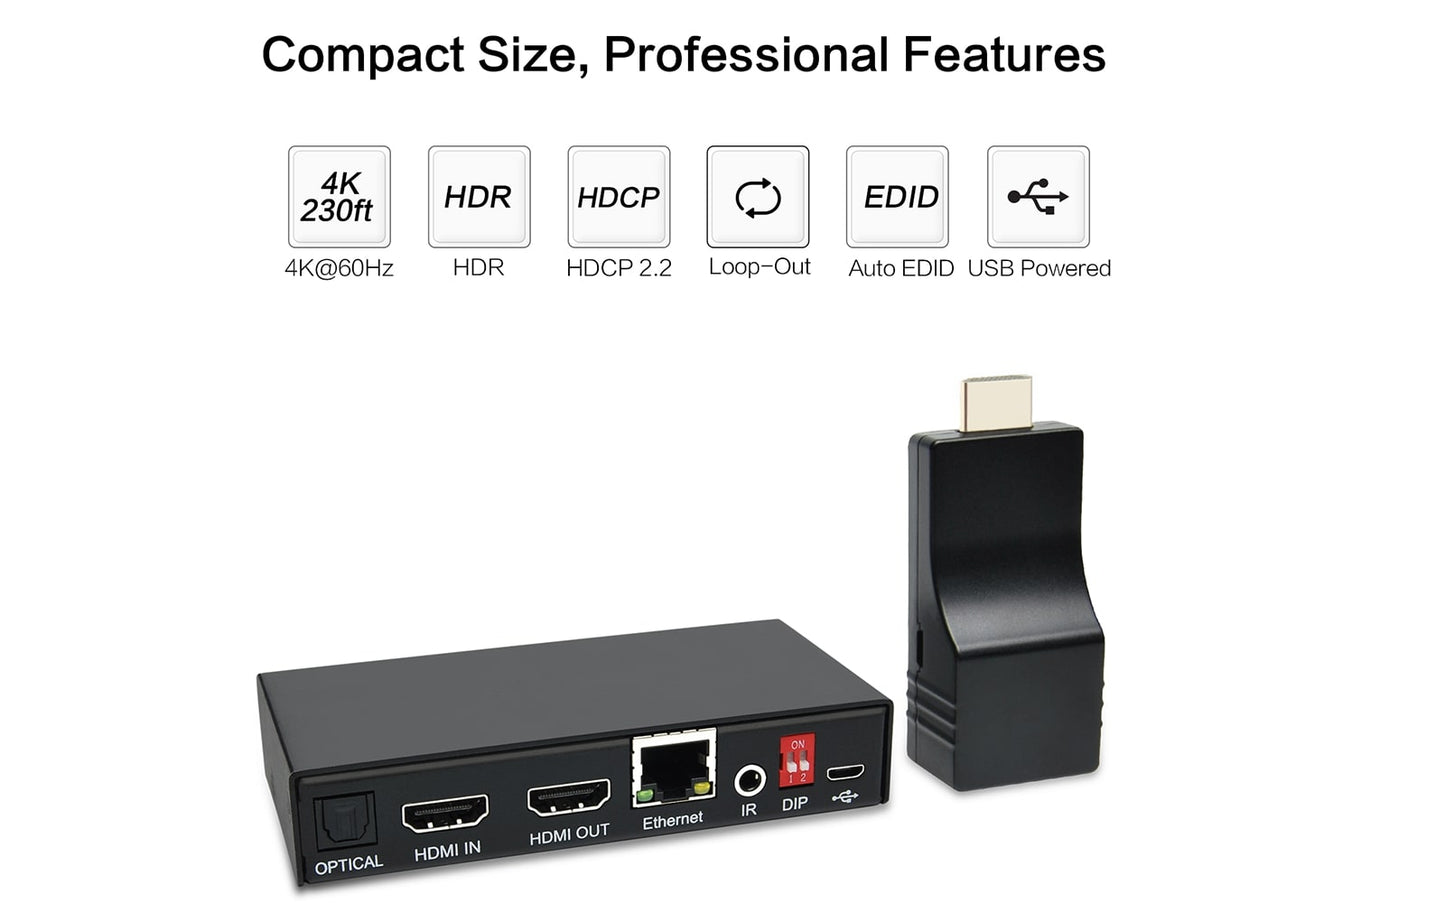  HE-35 4K HDMI over Ethernet Extender- compact size